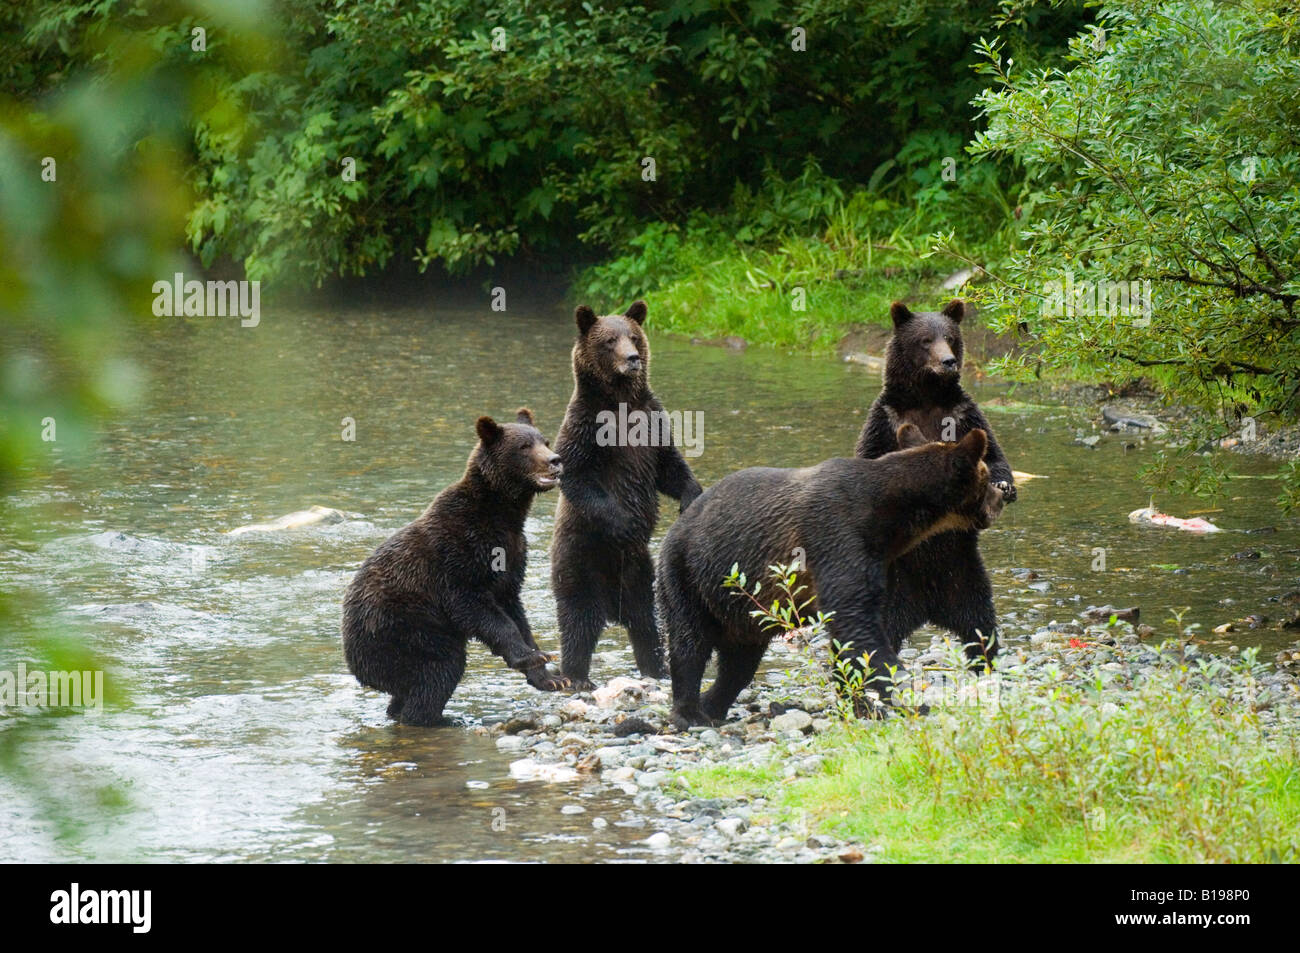 Grizzly Bear (Ursus arctos) Female with 3 yearling Cubs. When bears sense danger they often stand to identify the source. Fish C Stock Photo